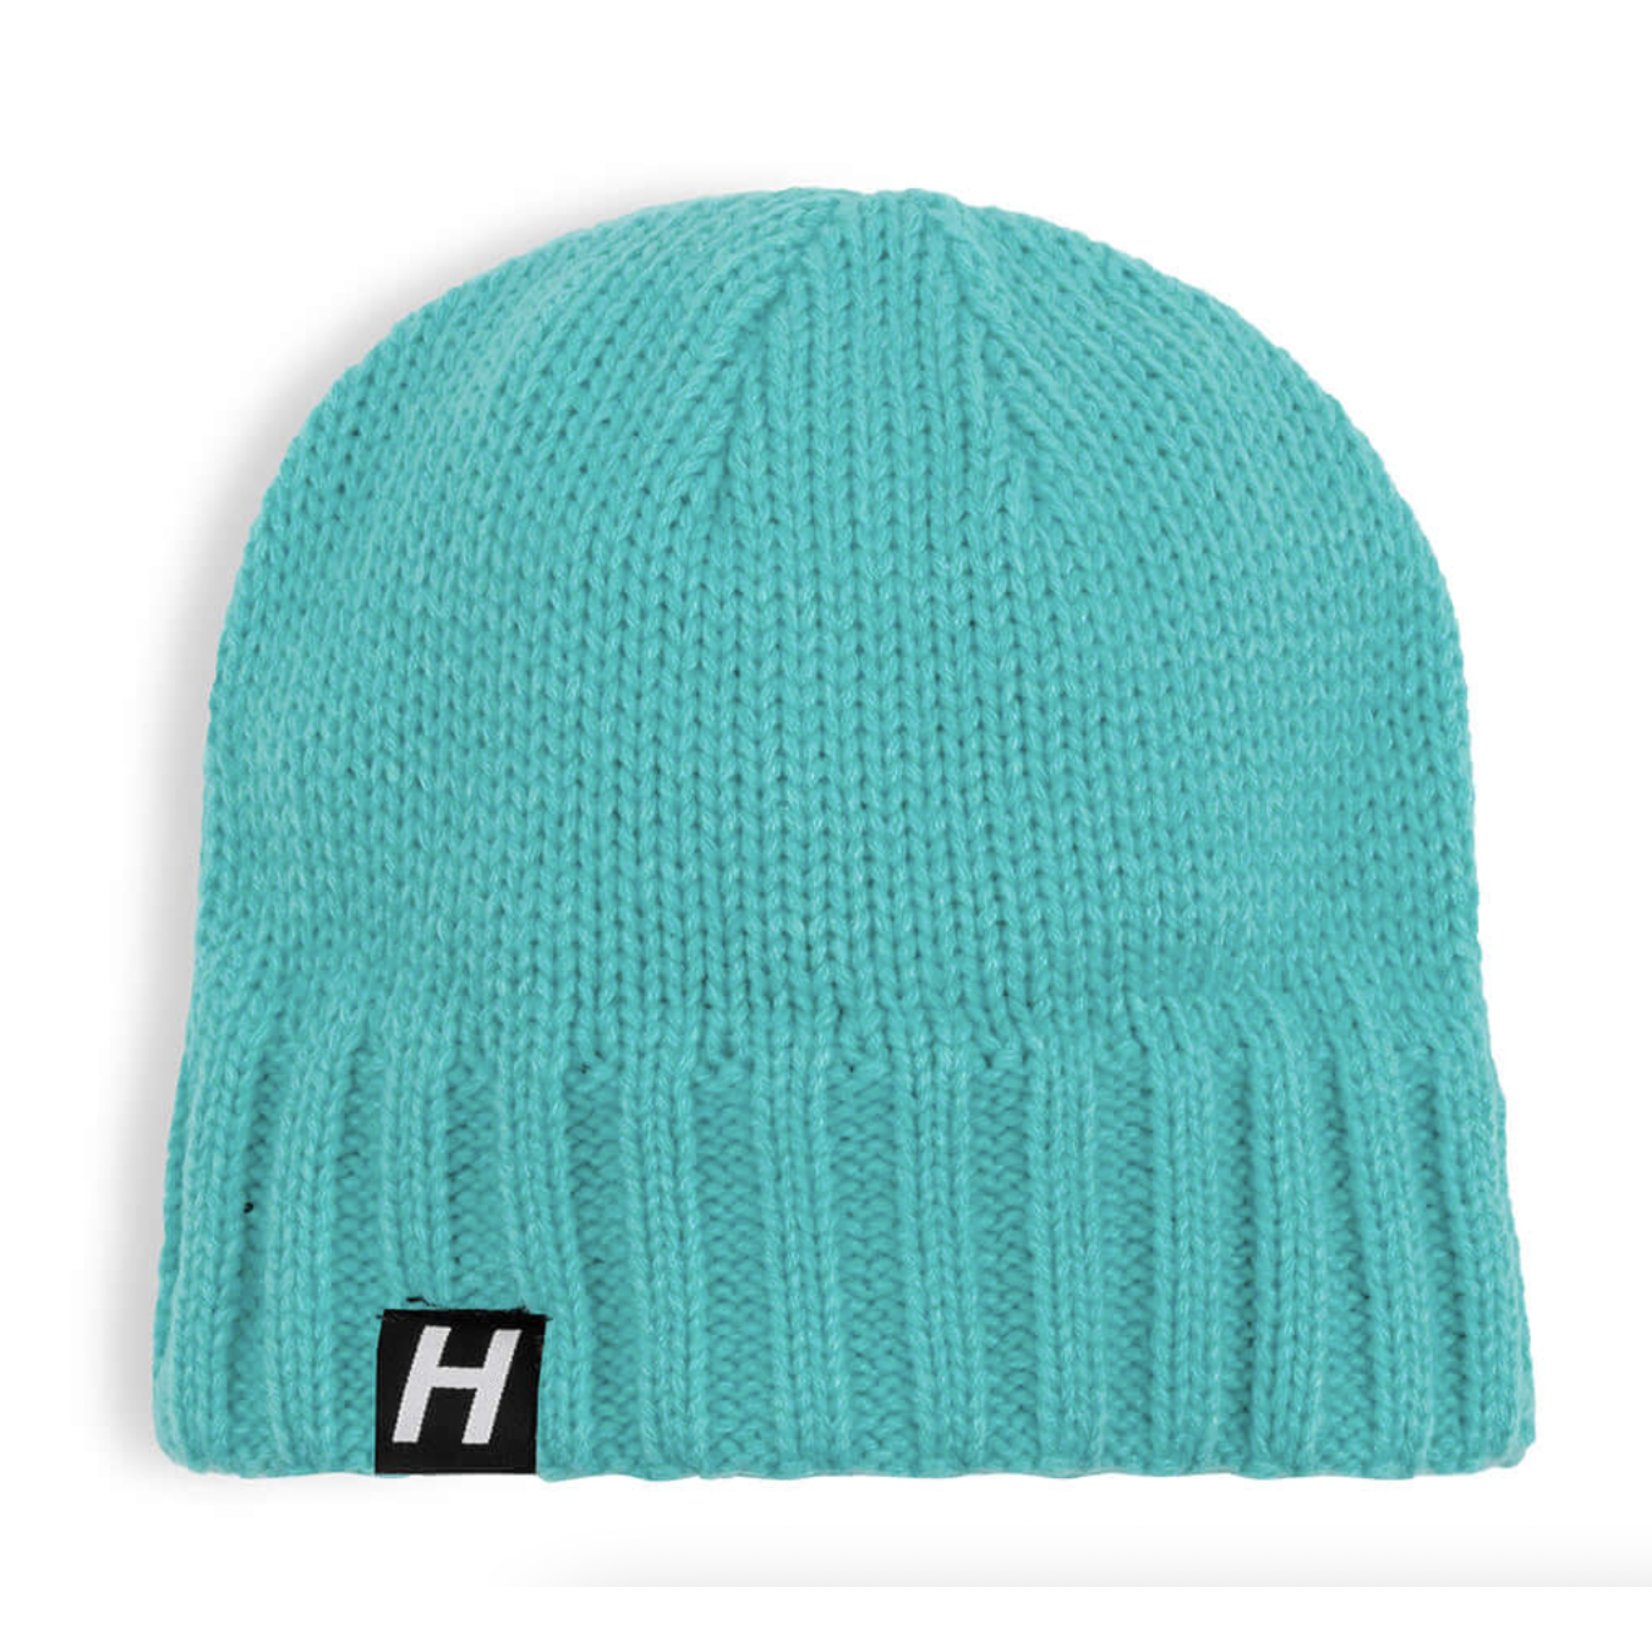 Hipsterkid Classic Beanie - The Real Teal